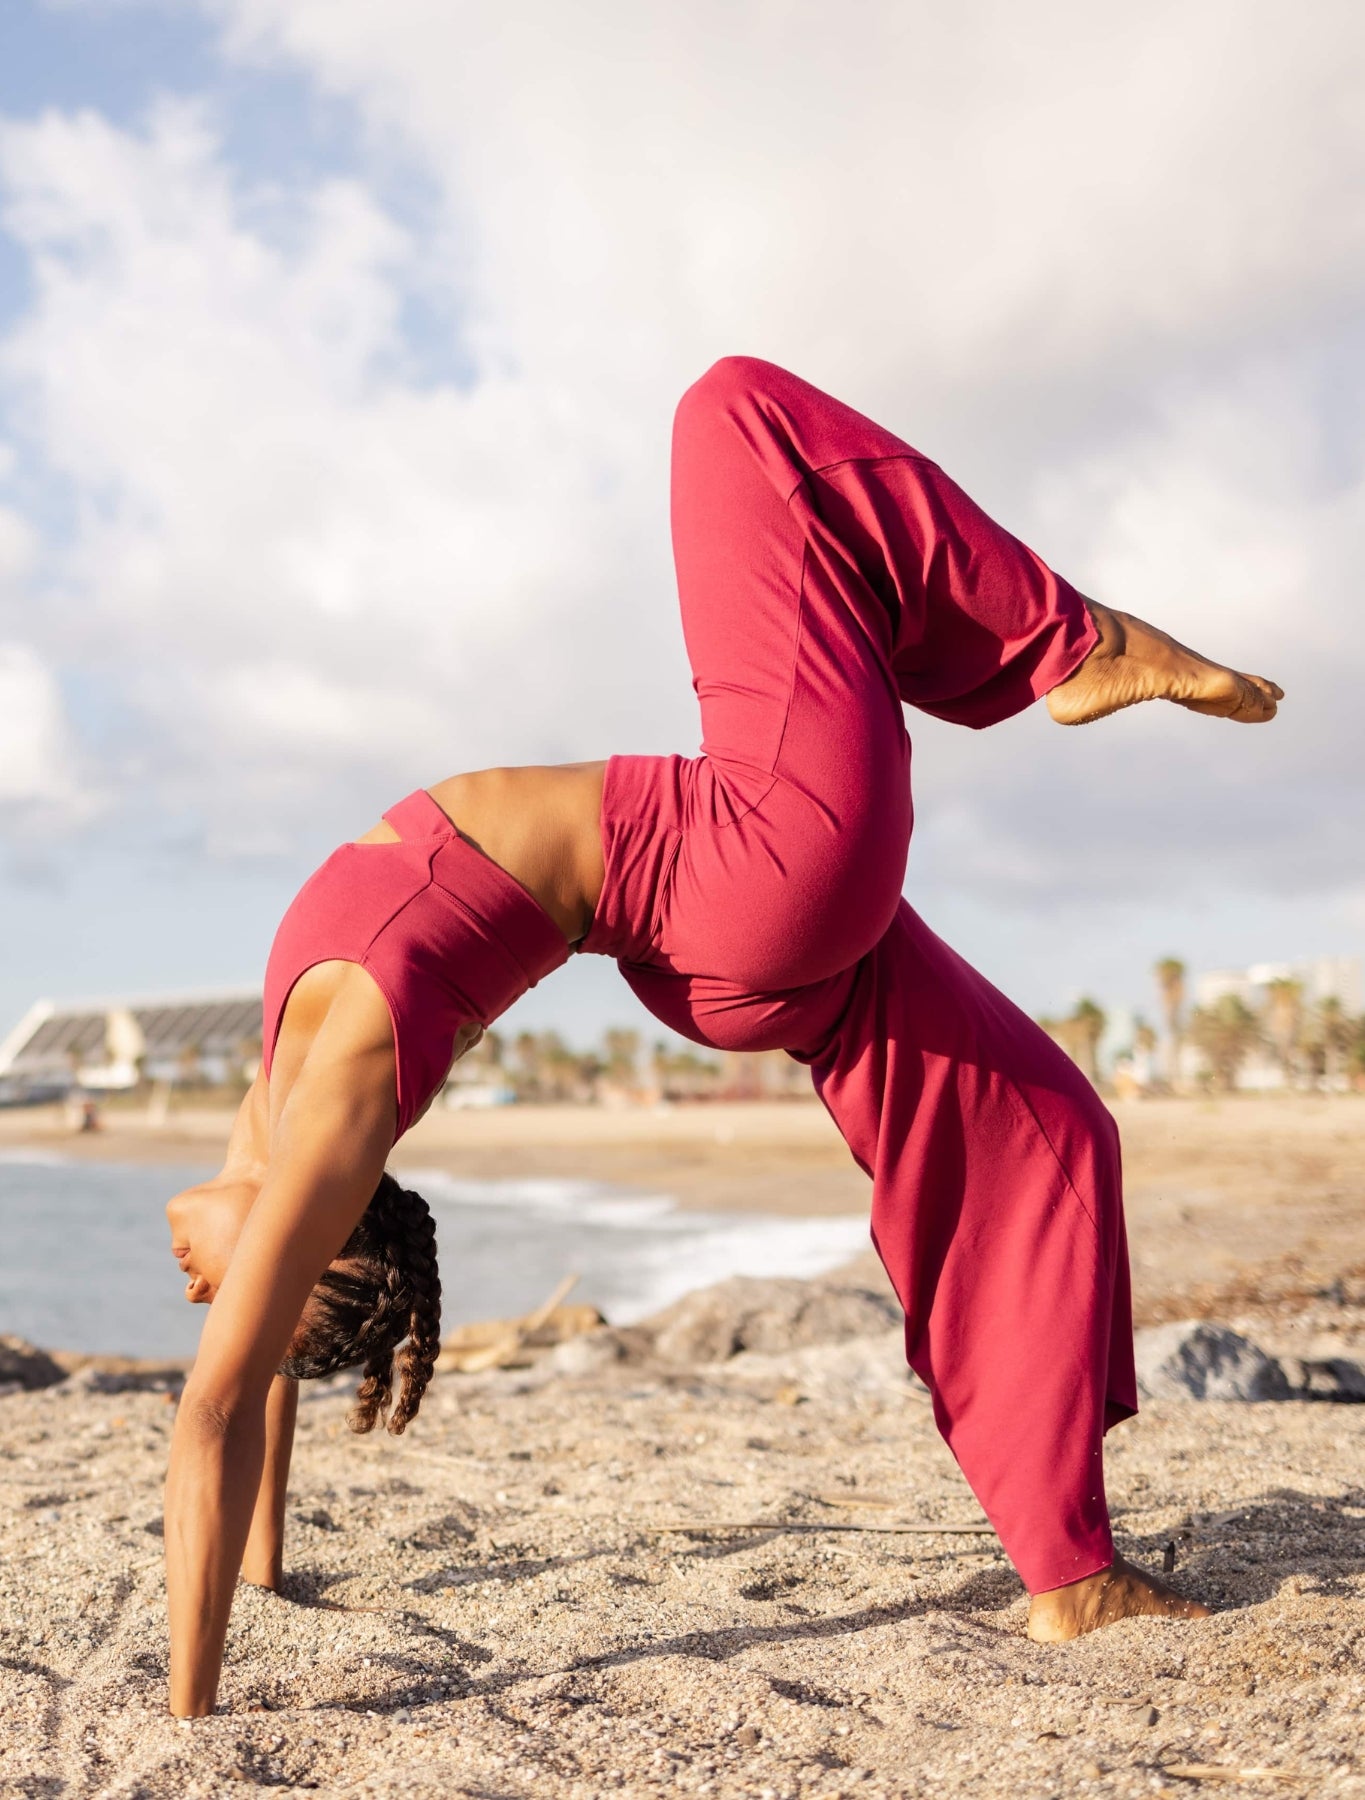 Shambhala Yoga's embodiment of strength and grace - a practitioner performs an advanced asana on the beach, wearing sustainable plum-colored yoga wear, exemplifying the balance between human agility and the natural world.